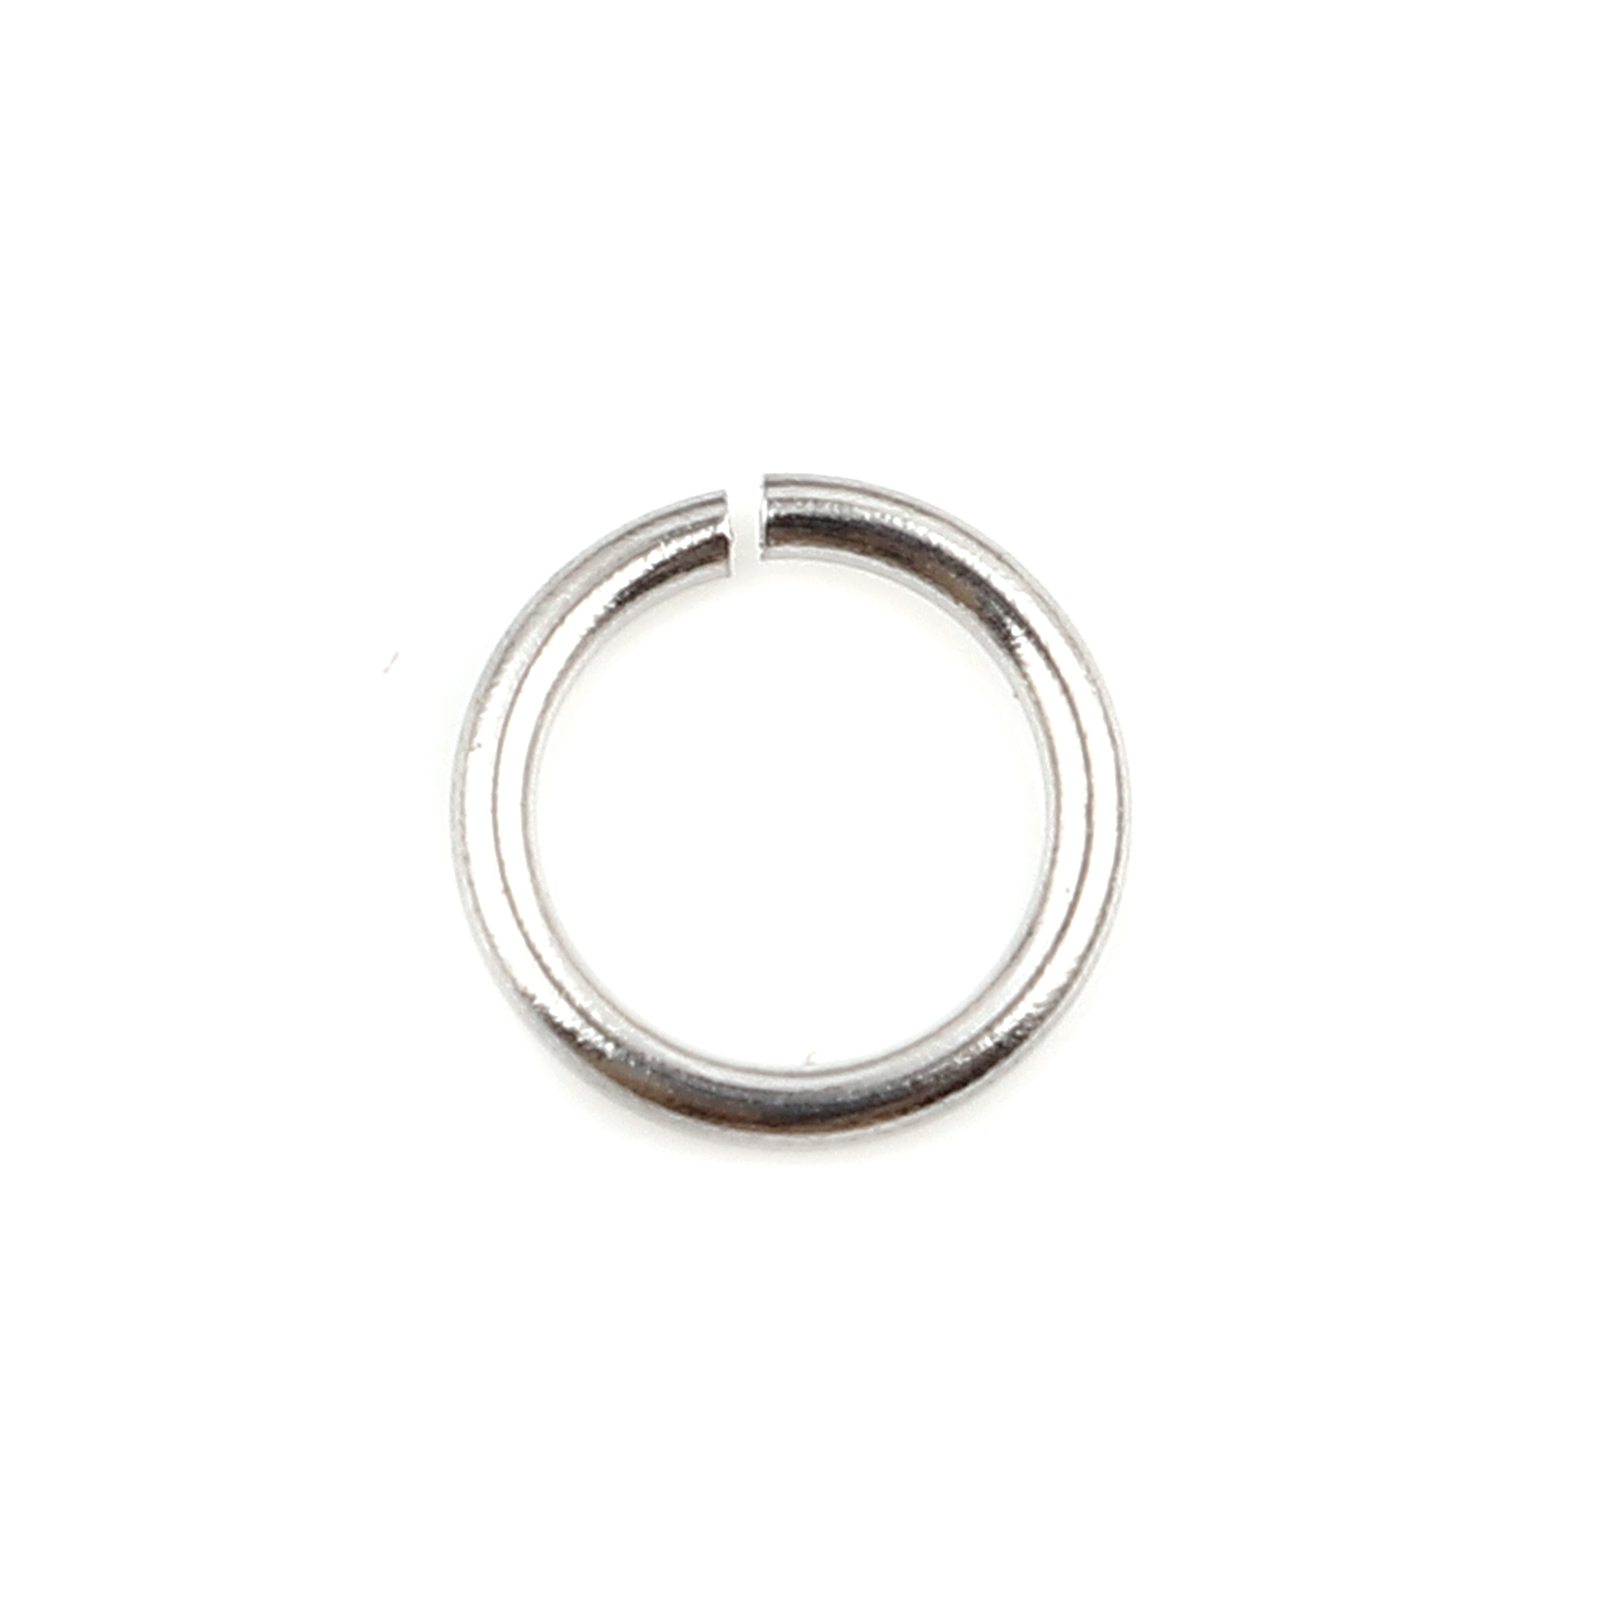 Picture of 0.8mm Stainless Steel Open Jump Rings Findings Round Silver Tone 6mm Dia., 100 PCs